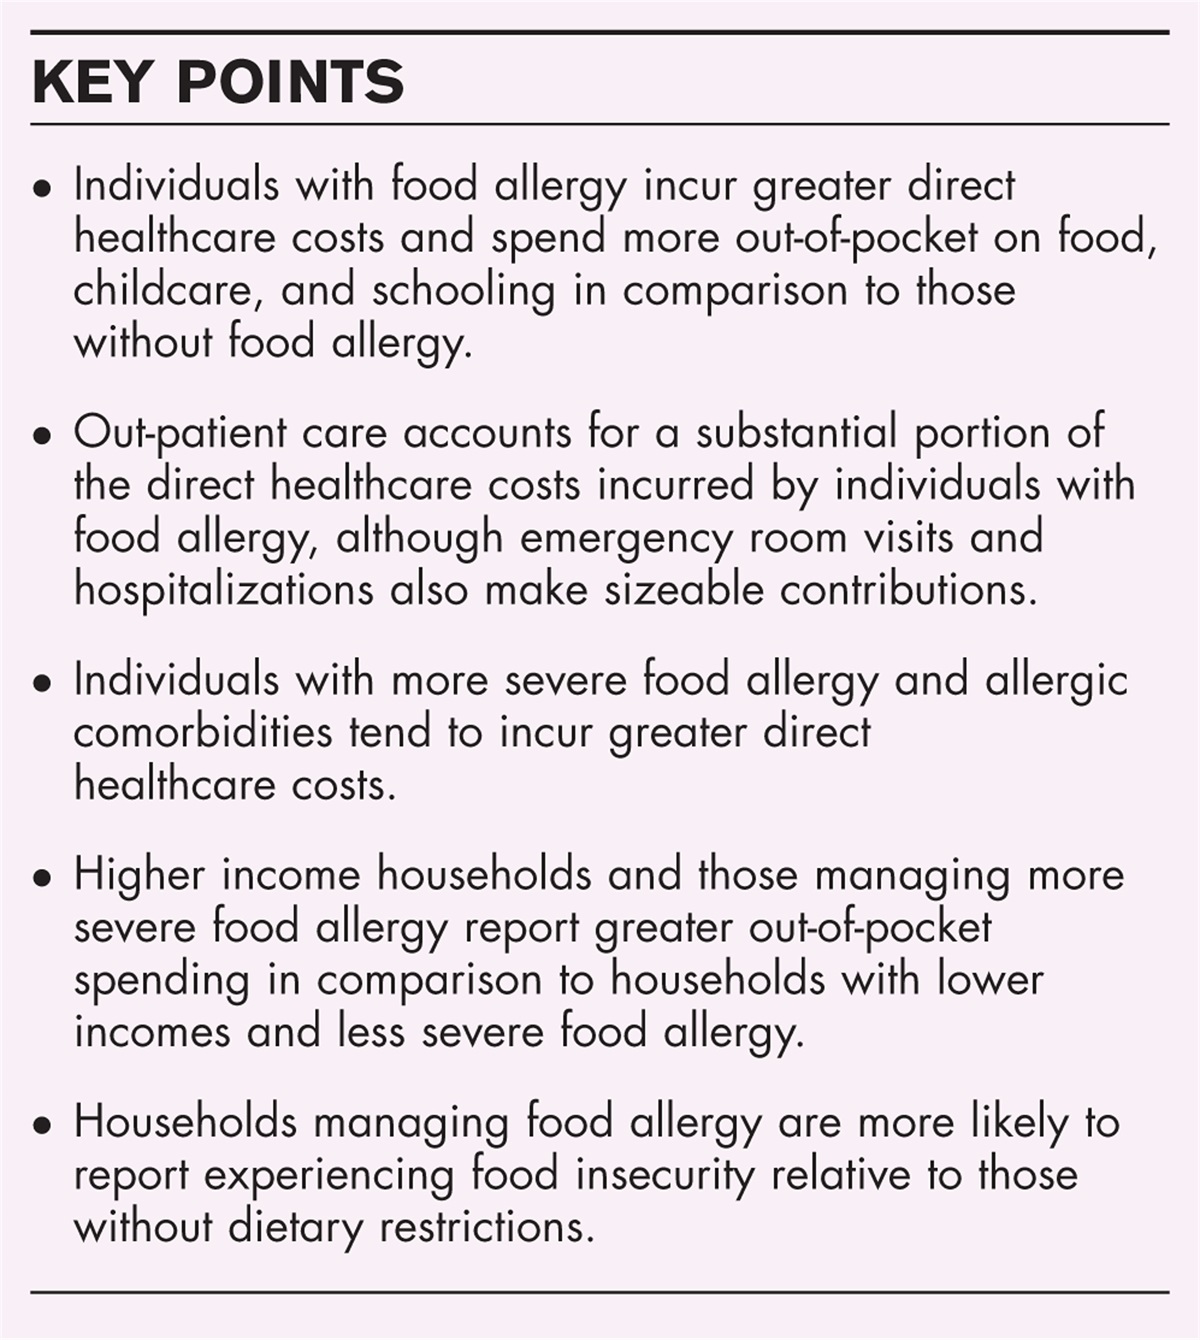 A review of food allergy-related costs with consideration to clinical and demographic factors